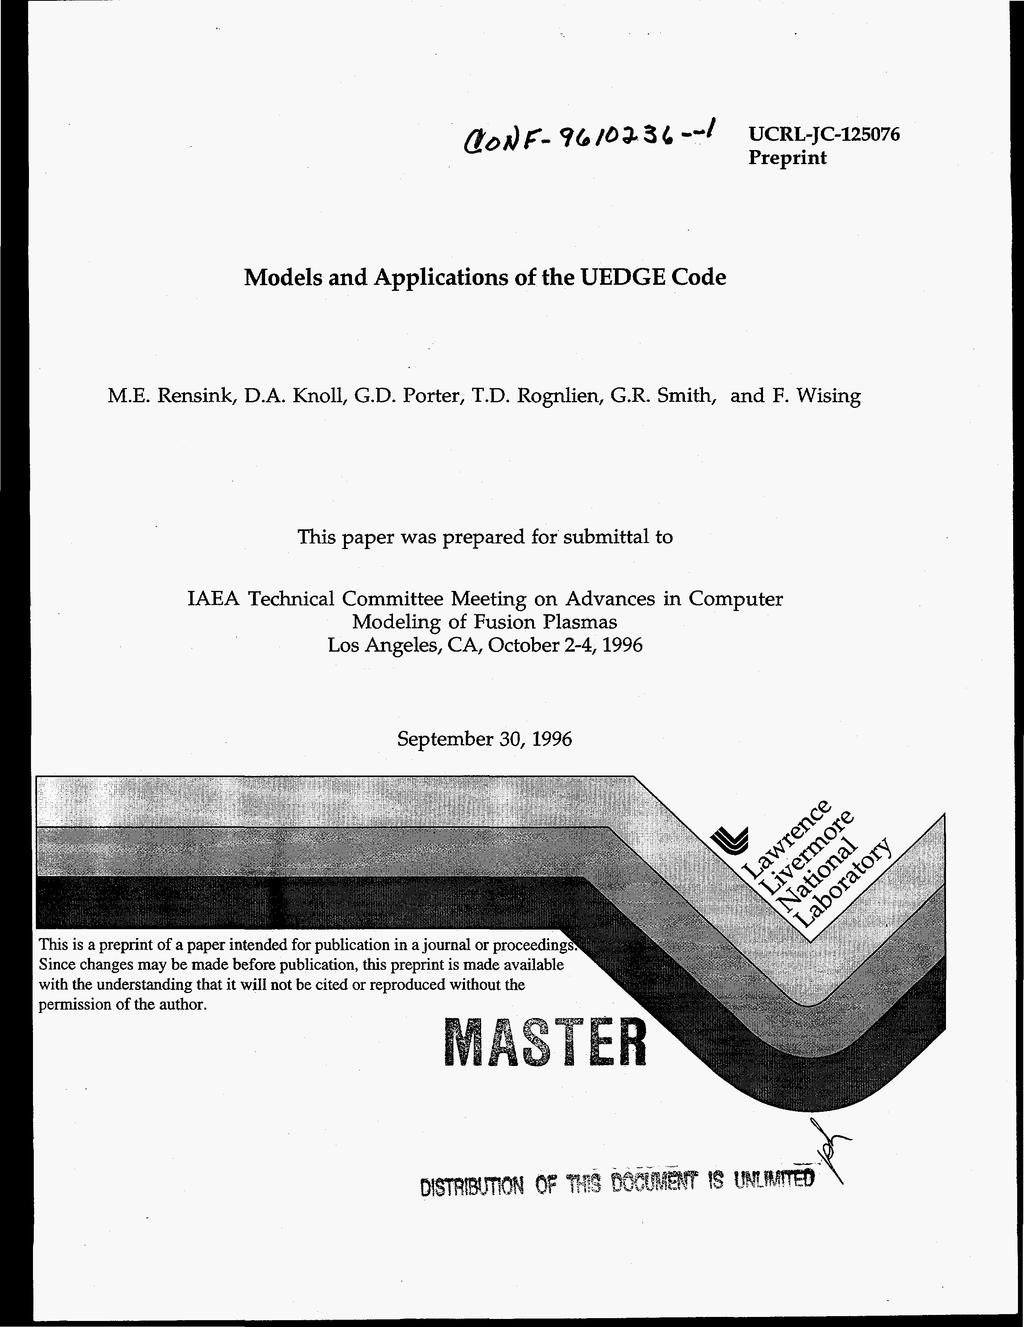 ao&p- 96 / O 3 4 - f UCRL-JC-12576 Preprint Models and Applications of the UEDGE Code ME Rensink DA Knoll GD Porter TD Rognlien GR Smith and F Wising